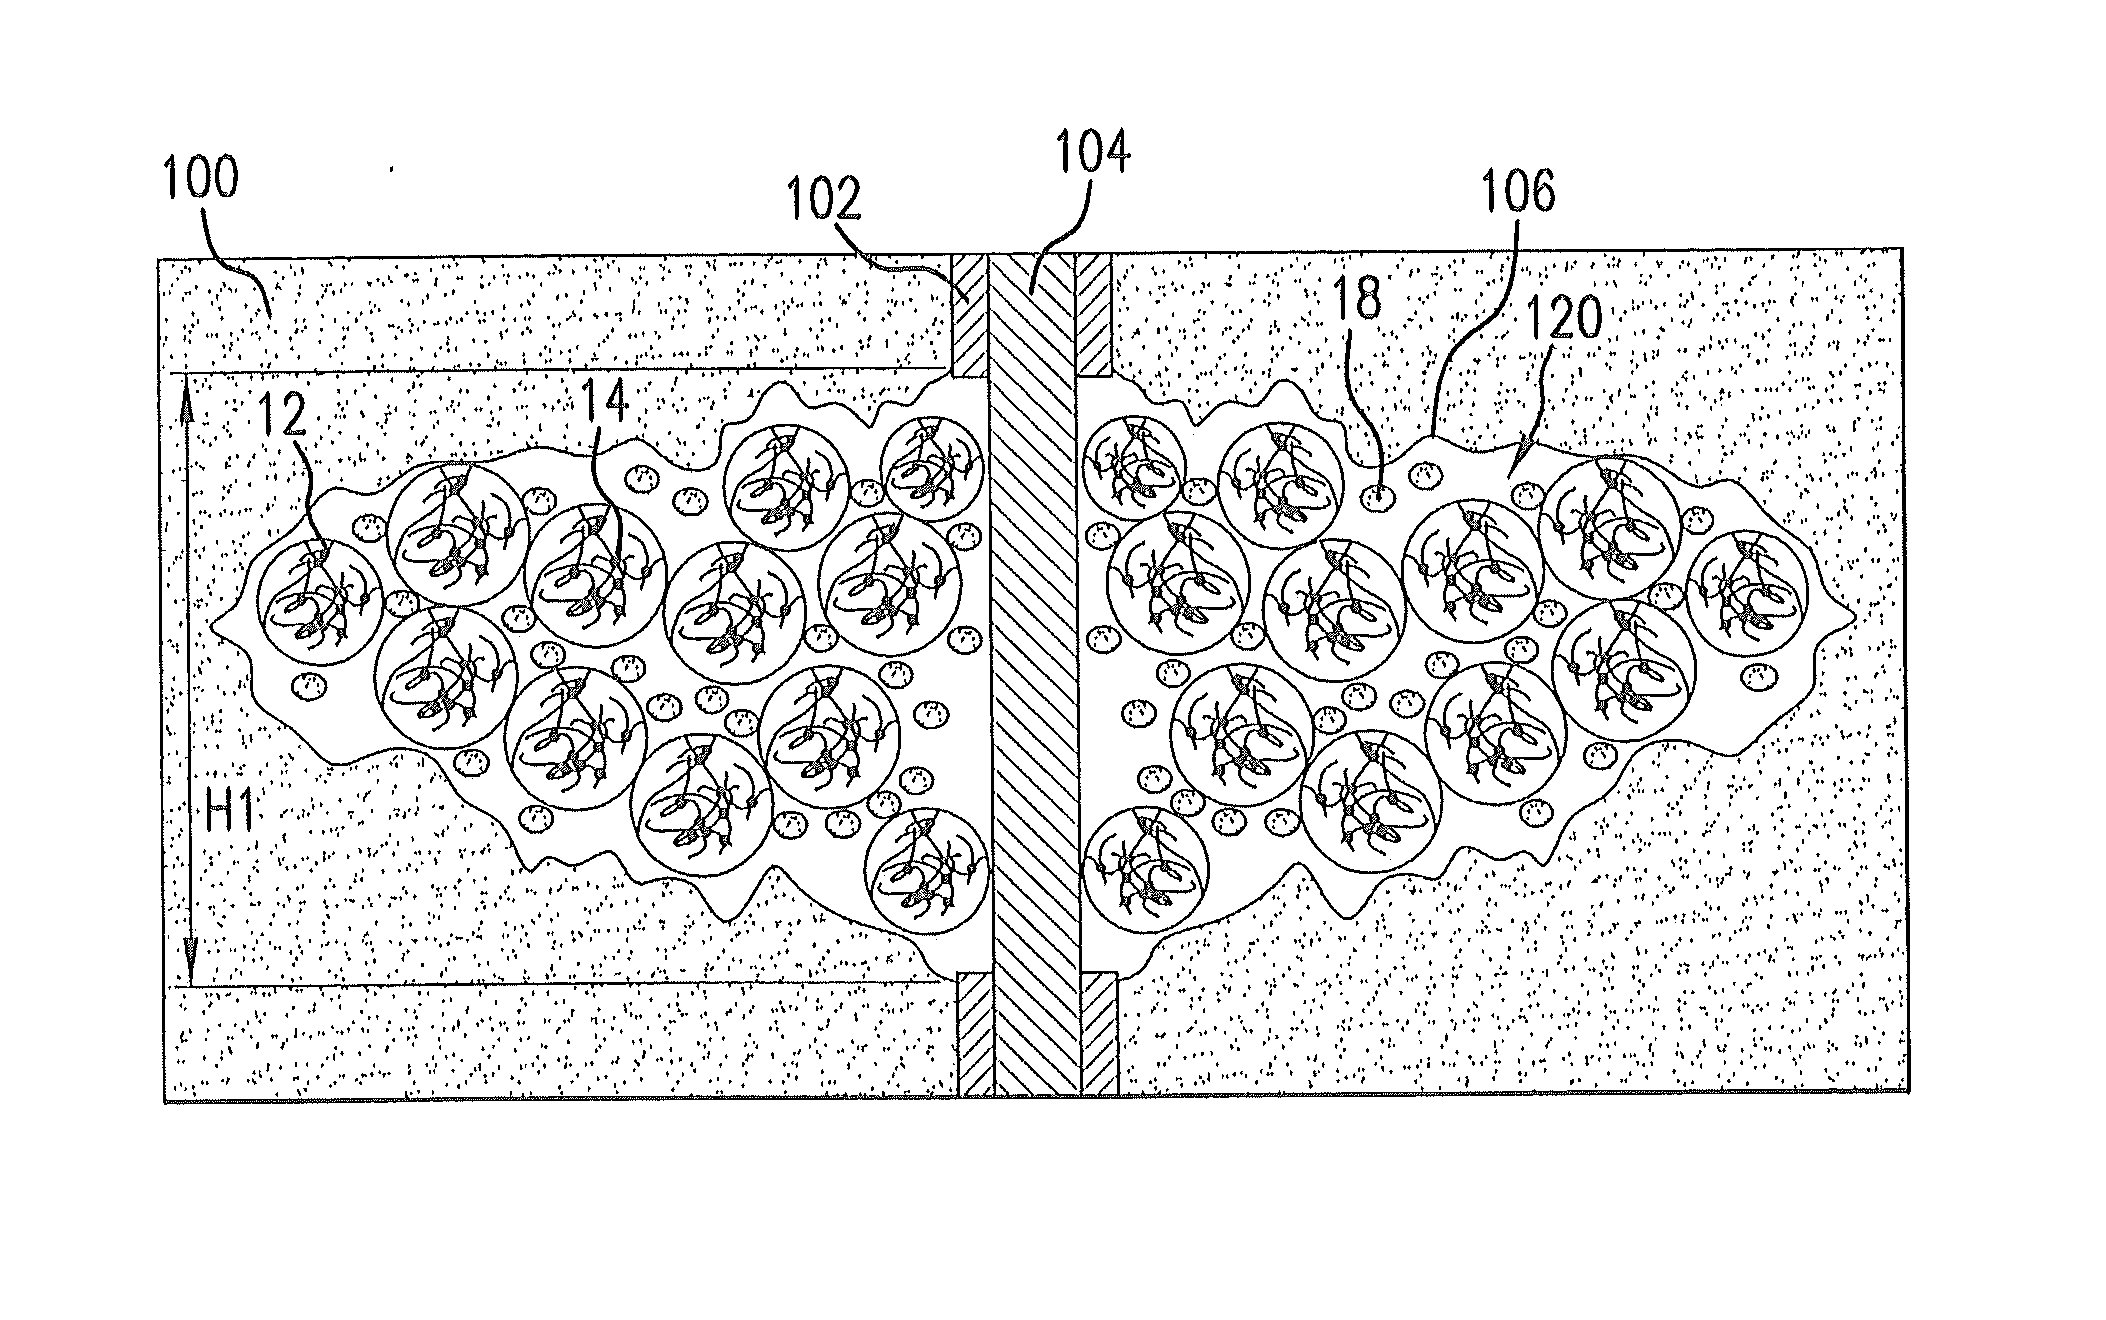 Hydraulic fracturing composition, method for making and use of same